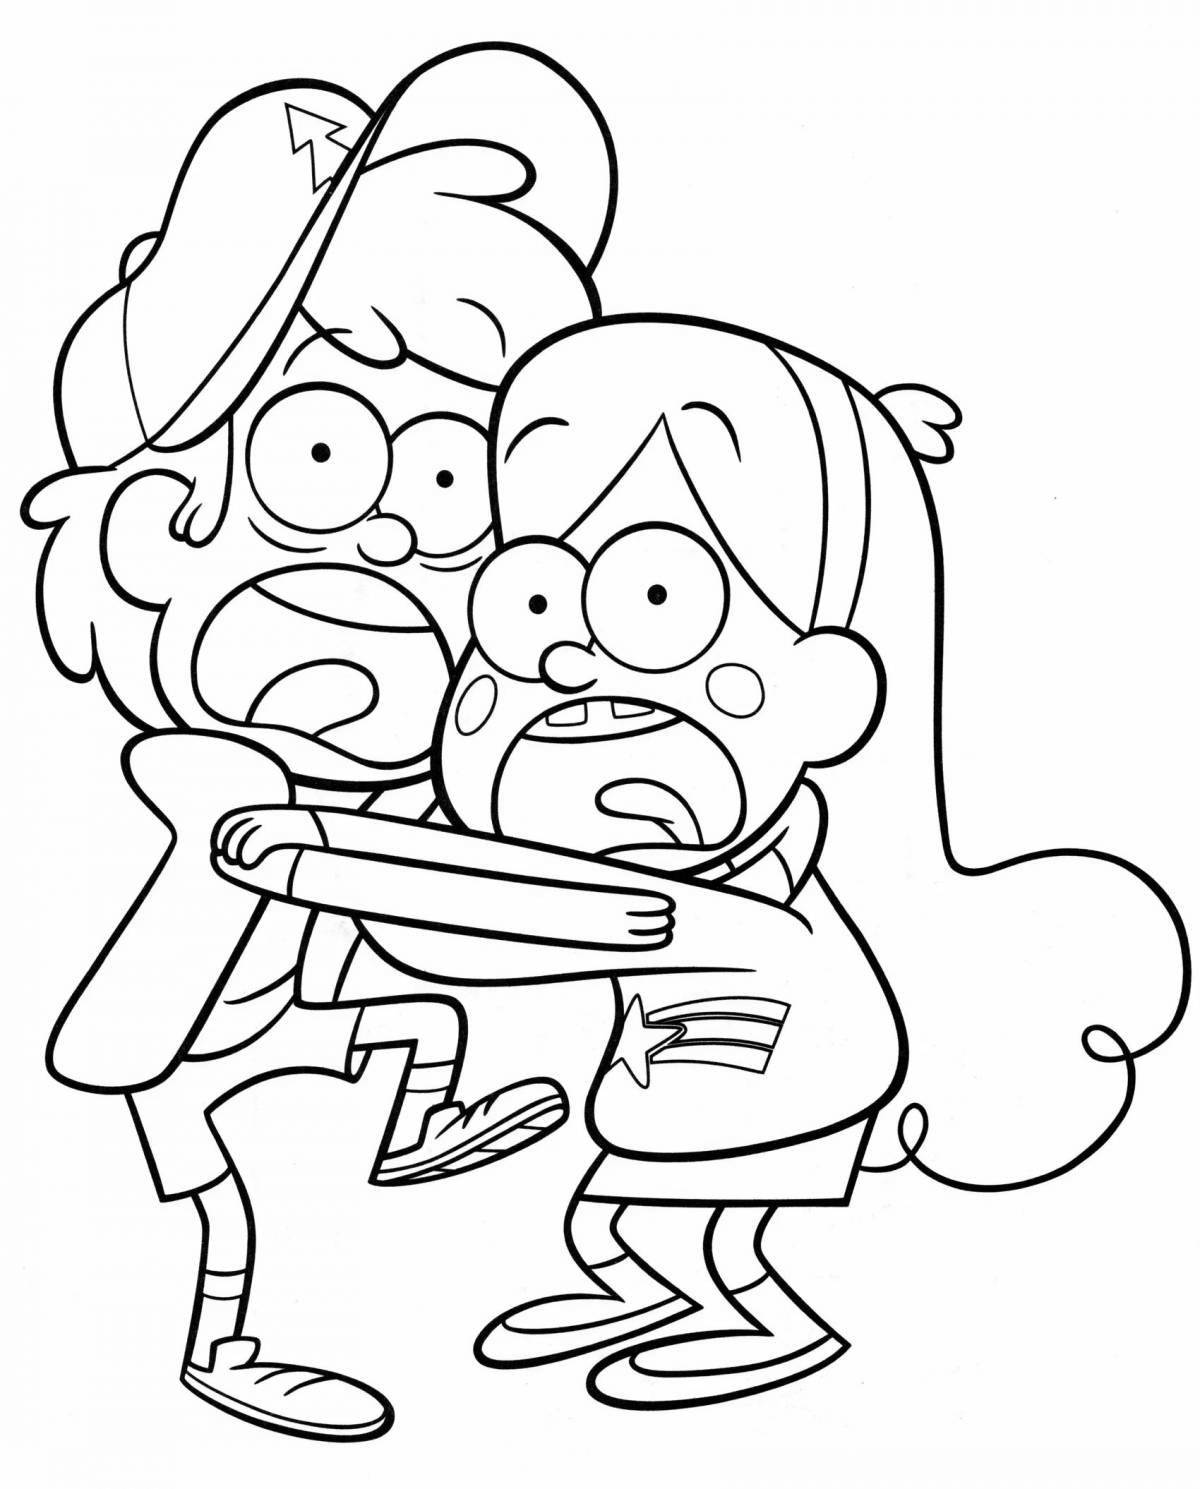 Gravity falls awesome coloring book for girls